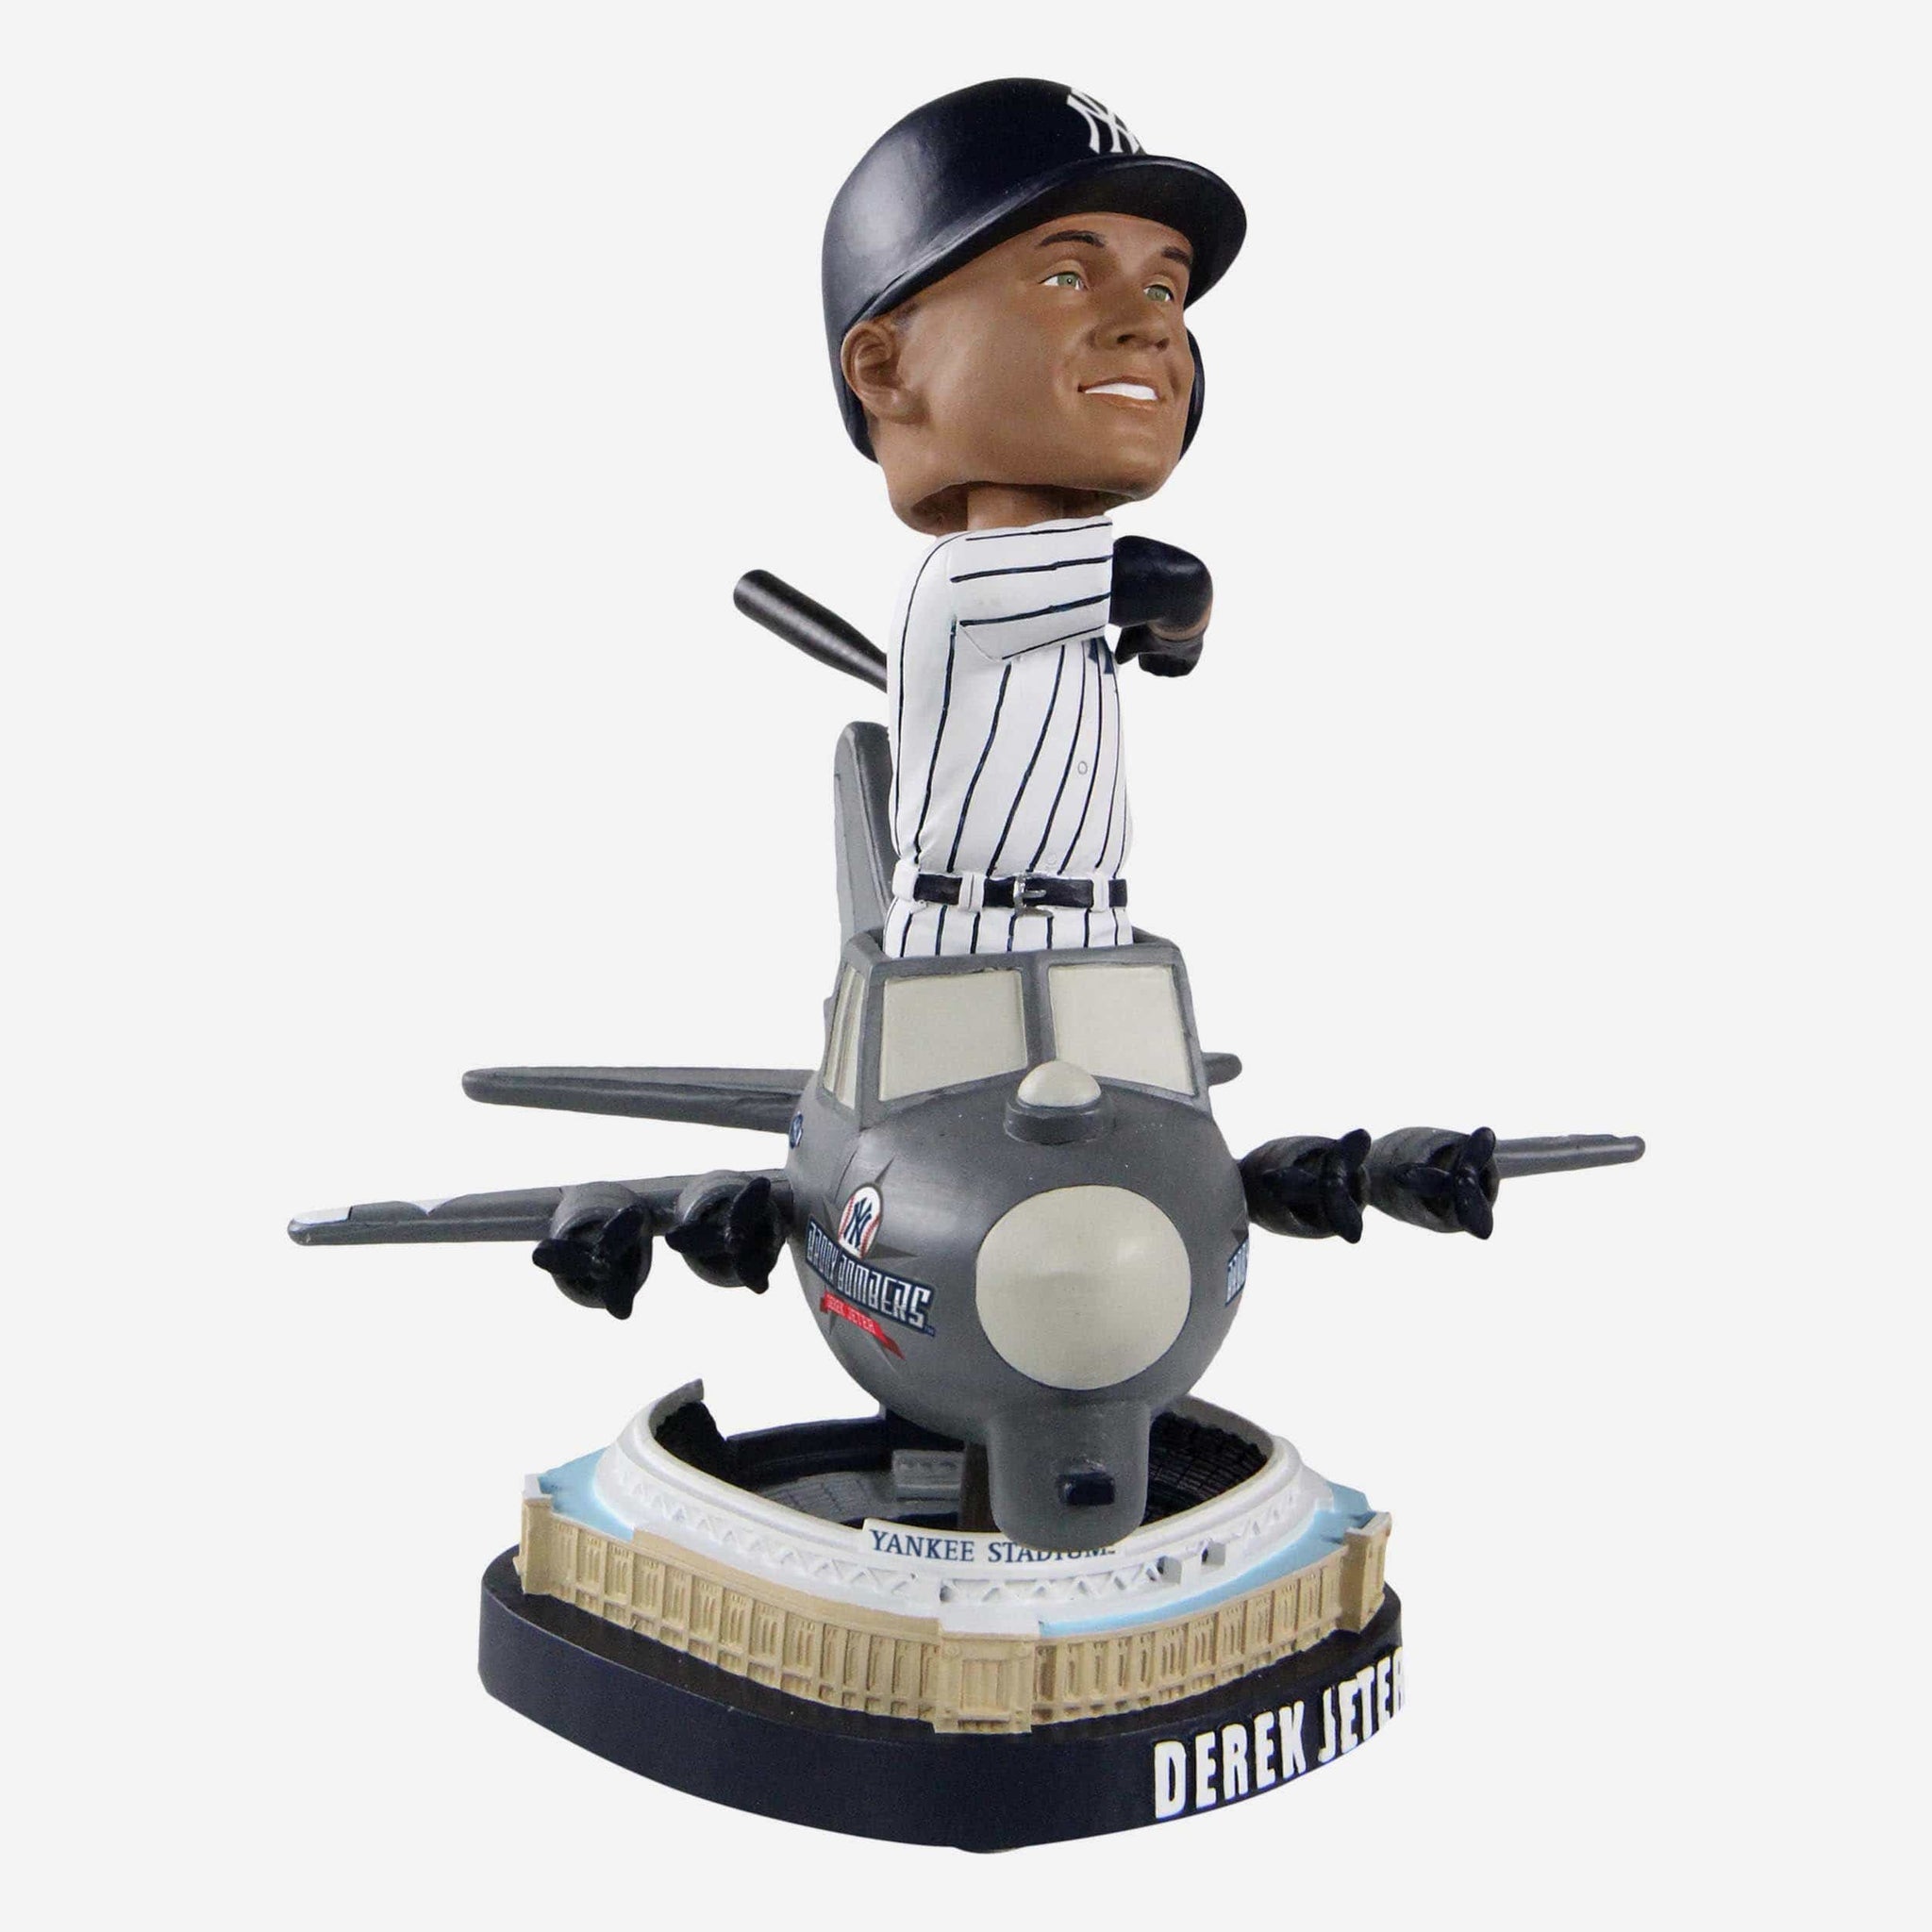 LOOK: FOCO releases bobblehead commemorating Yankees great Derek Jeter's  iconic 'The Dive' play